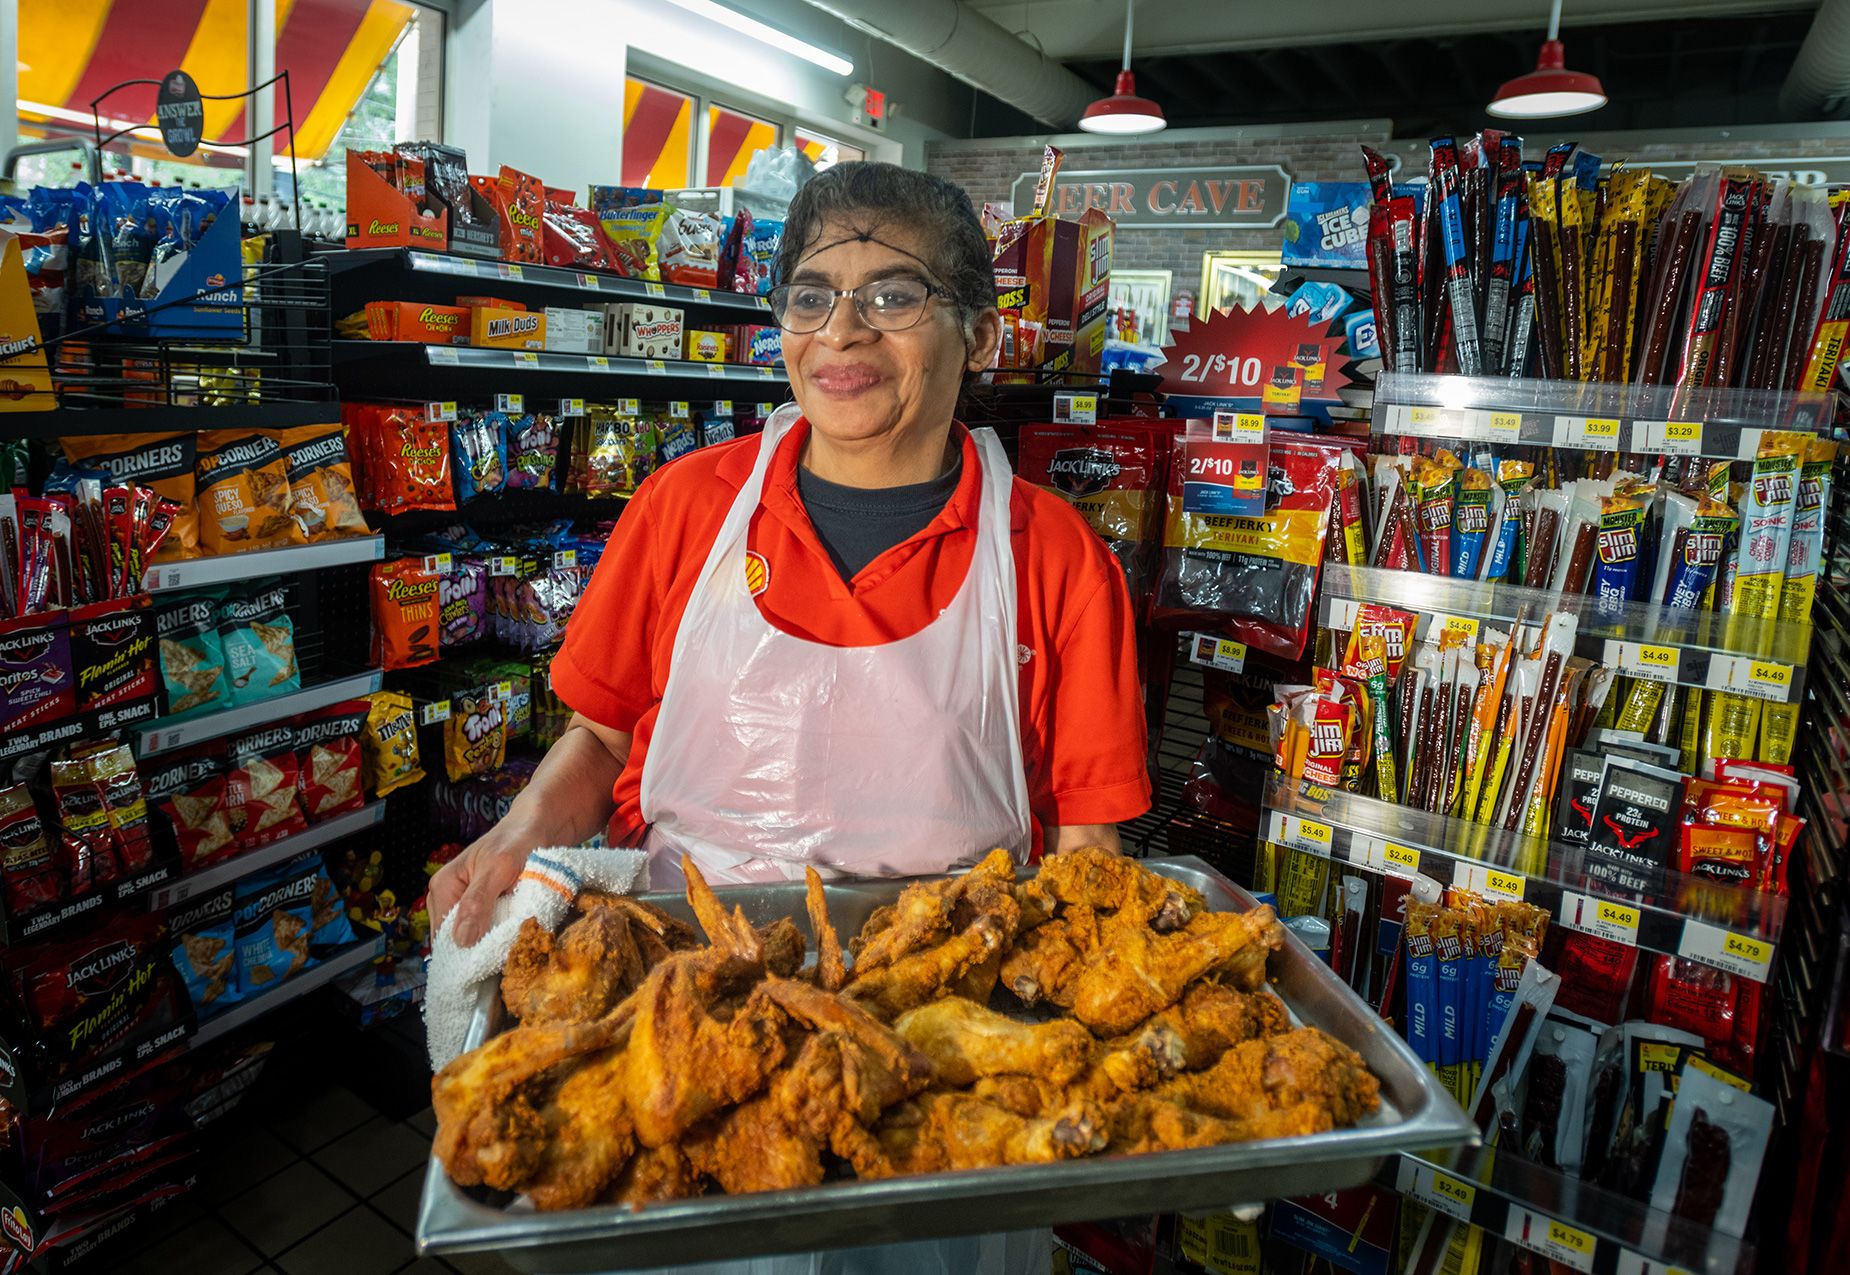 At Market Express, formerly Quik Shoppe, in Charlotte, Carolina, Medley photographed Marta Miranda, who had been frying chicken for 18 years.